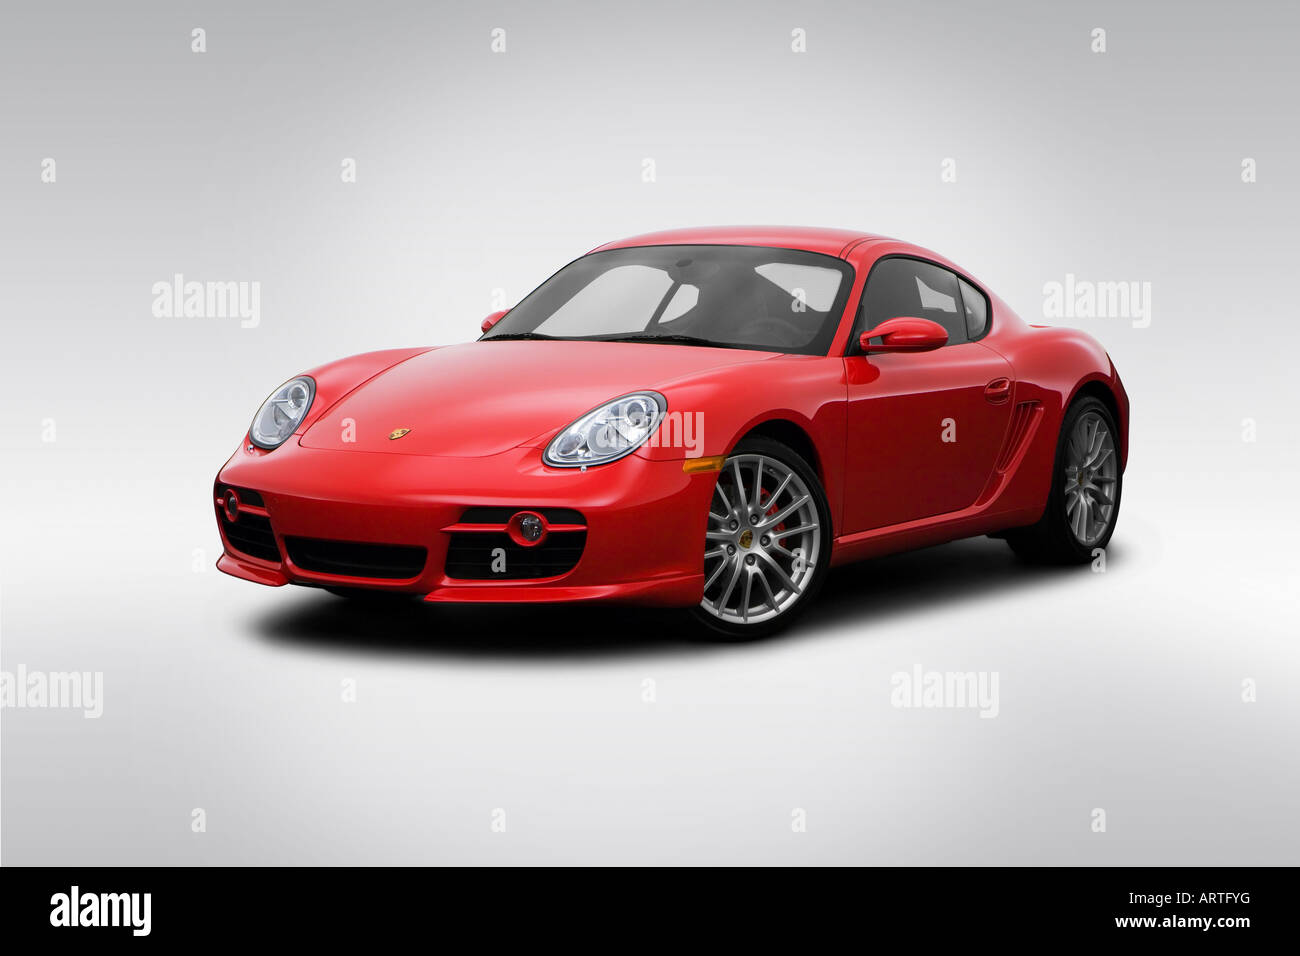 2008 Porsche Cayman S in Red - Front angle view Stock Photo